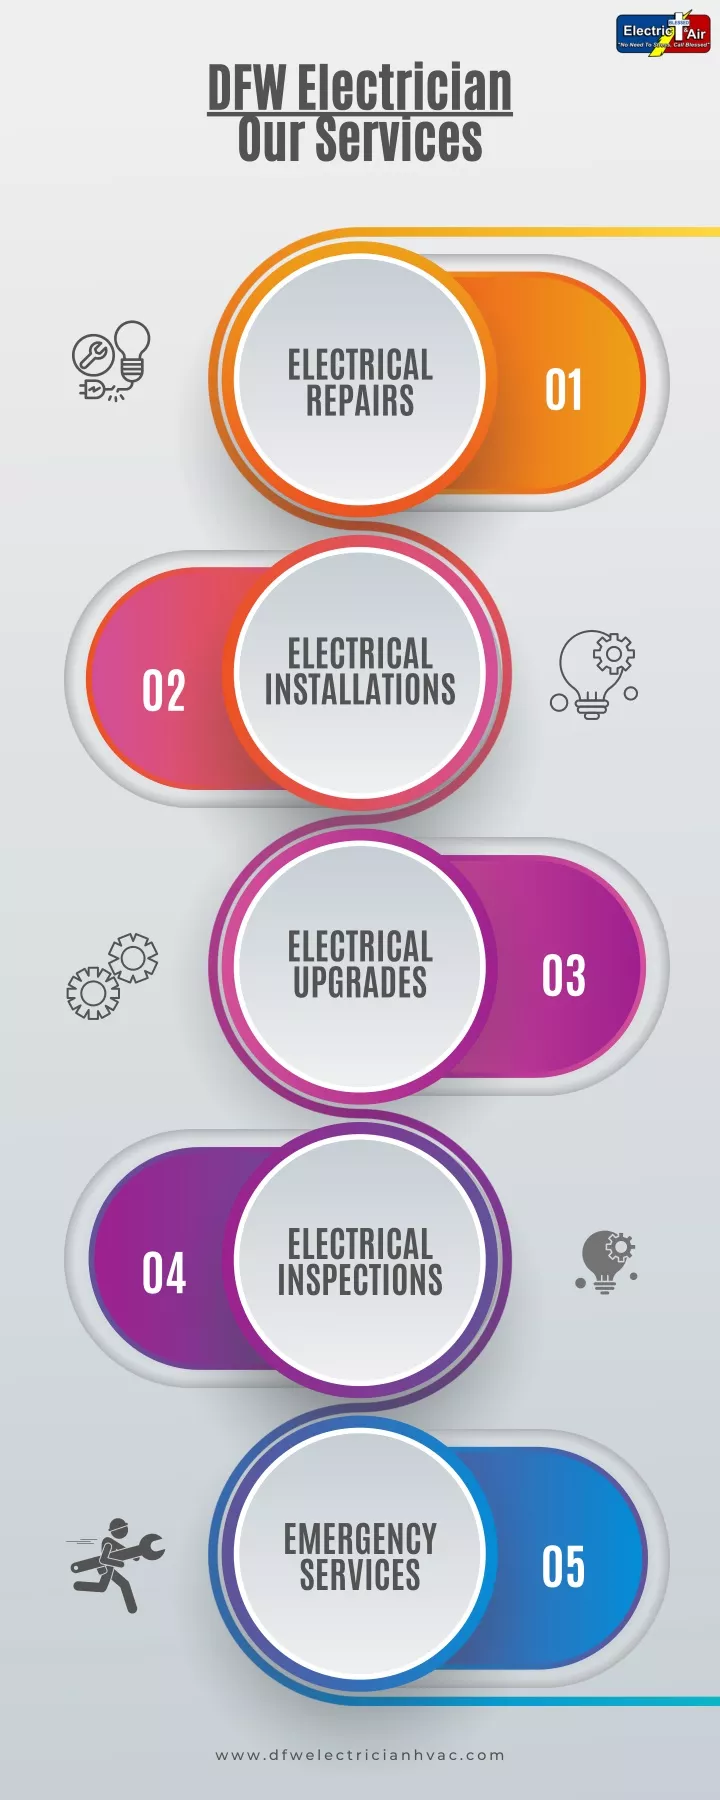 dfw electrician our services